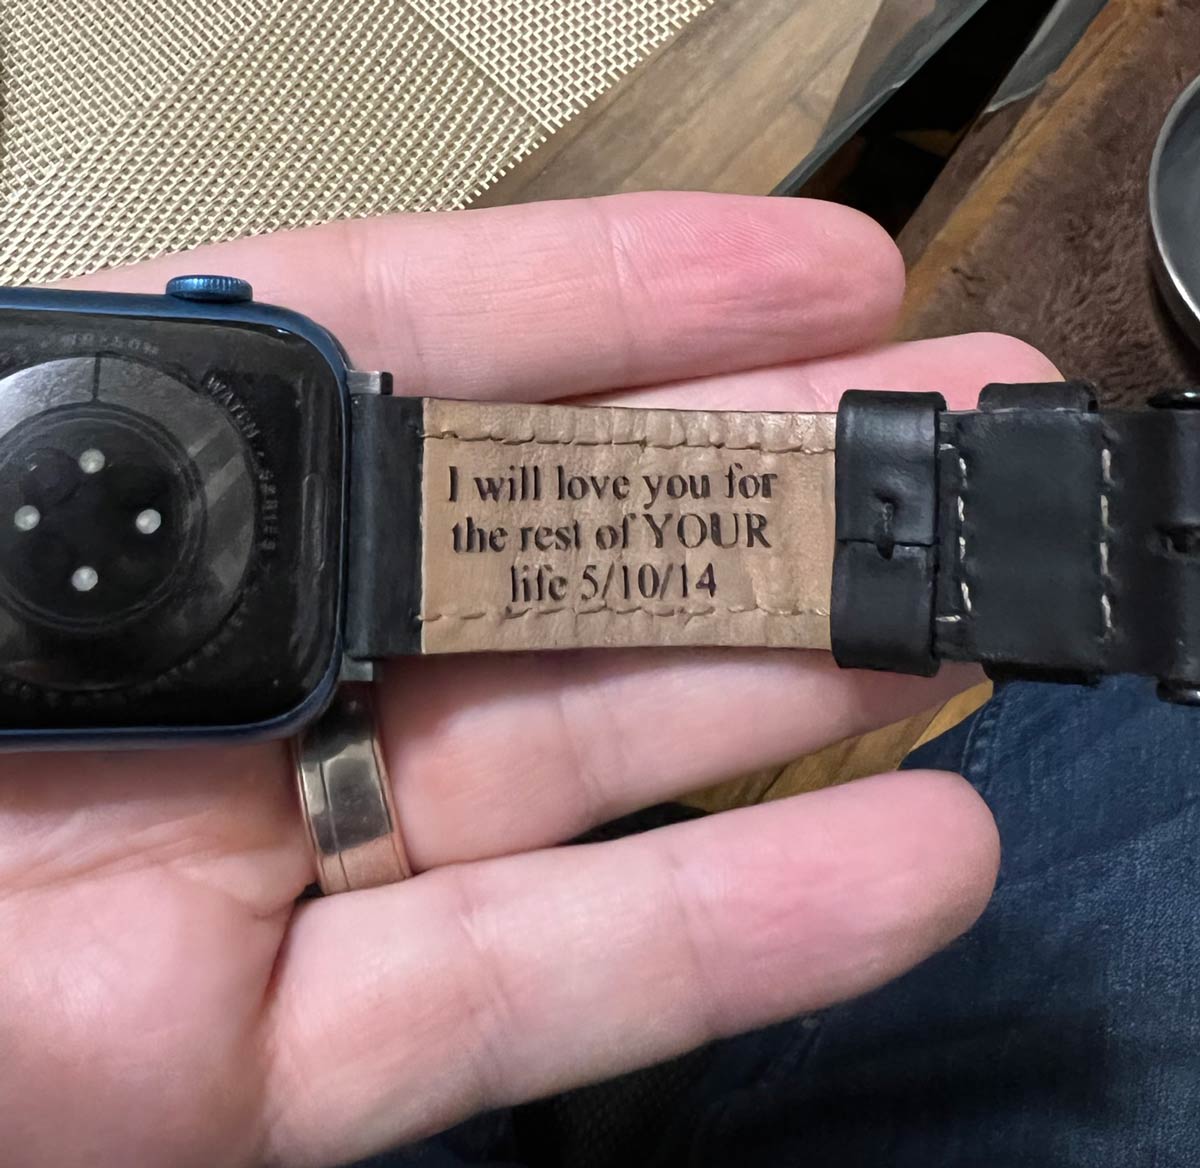 My wife got me an engraved watch band. A little ominous..